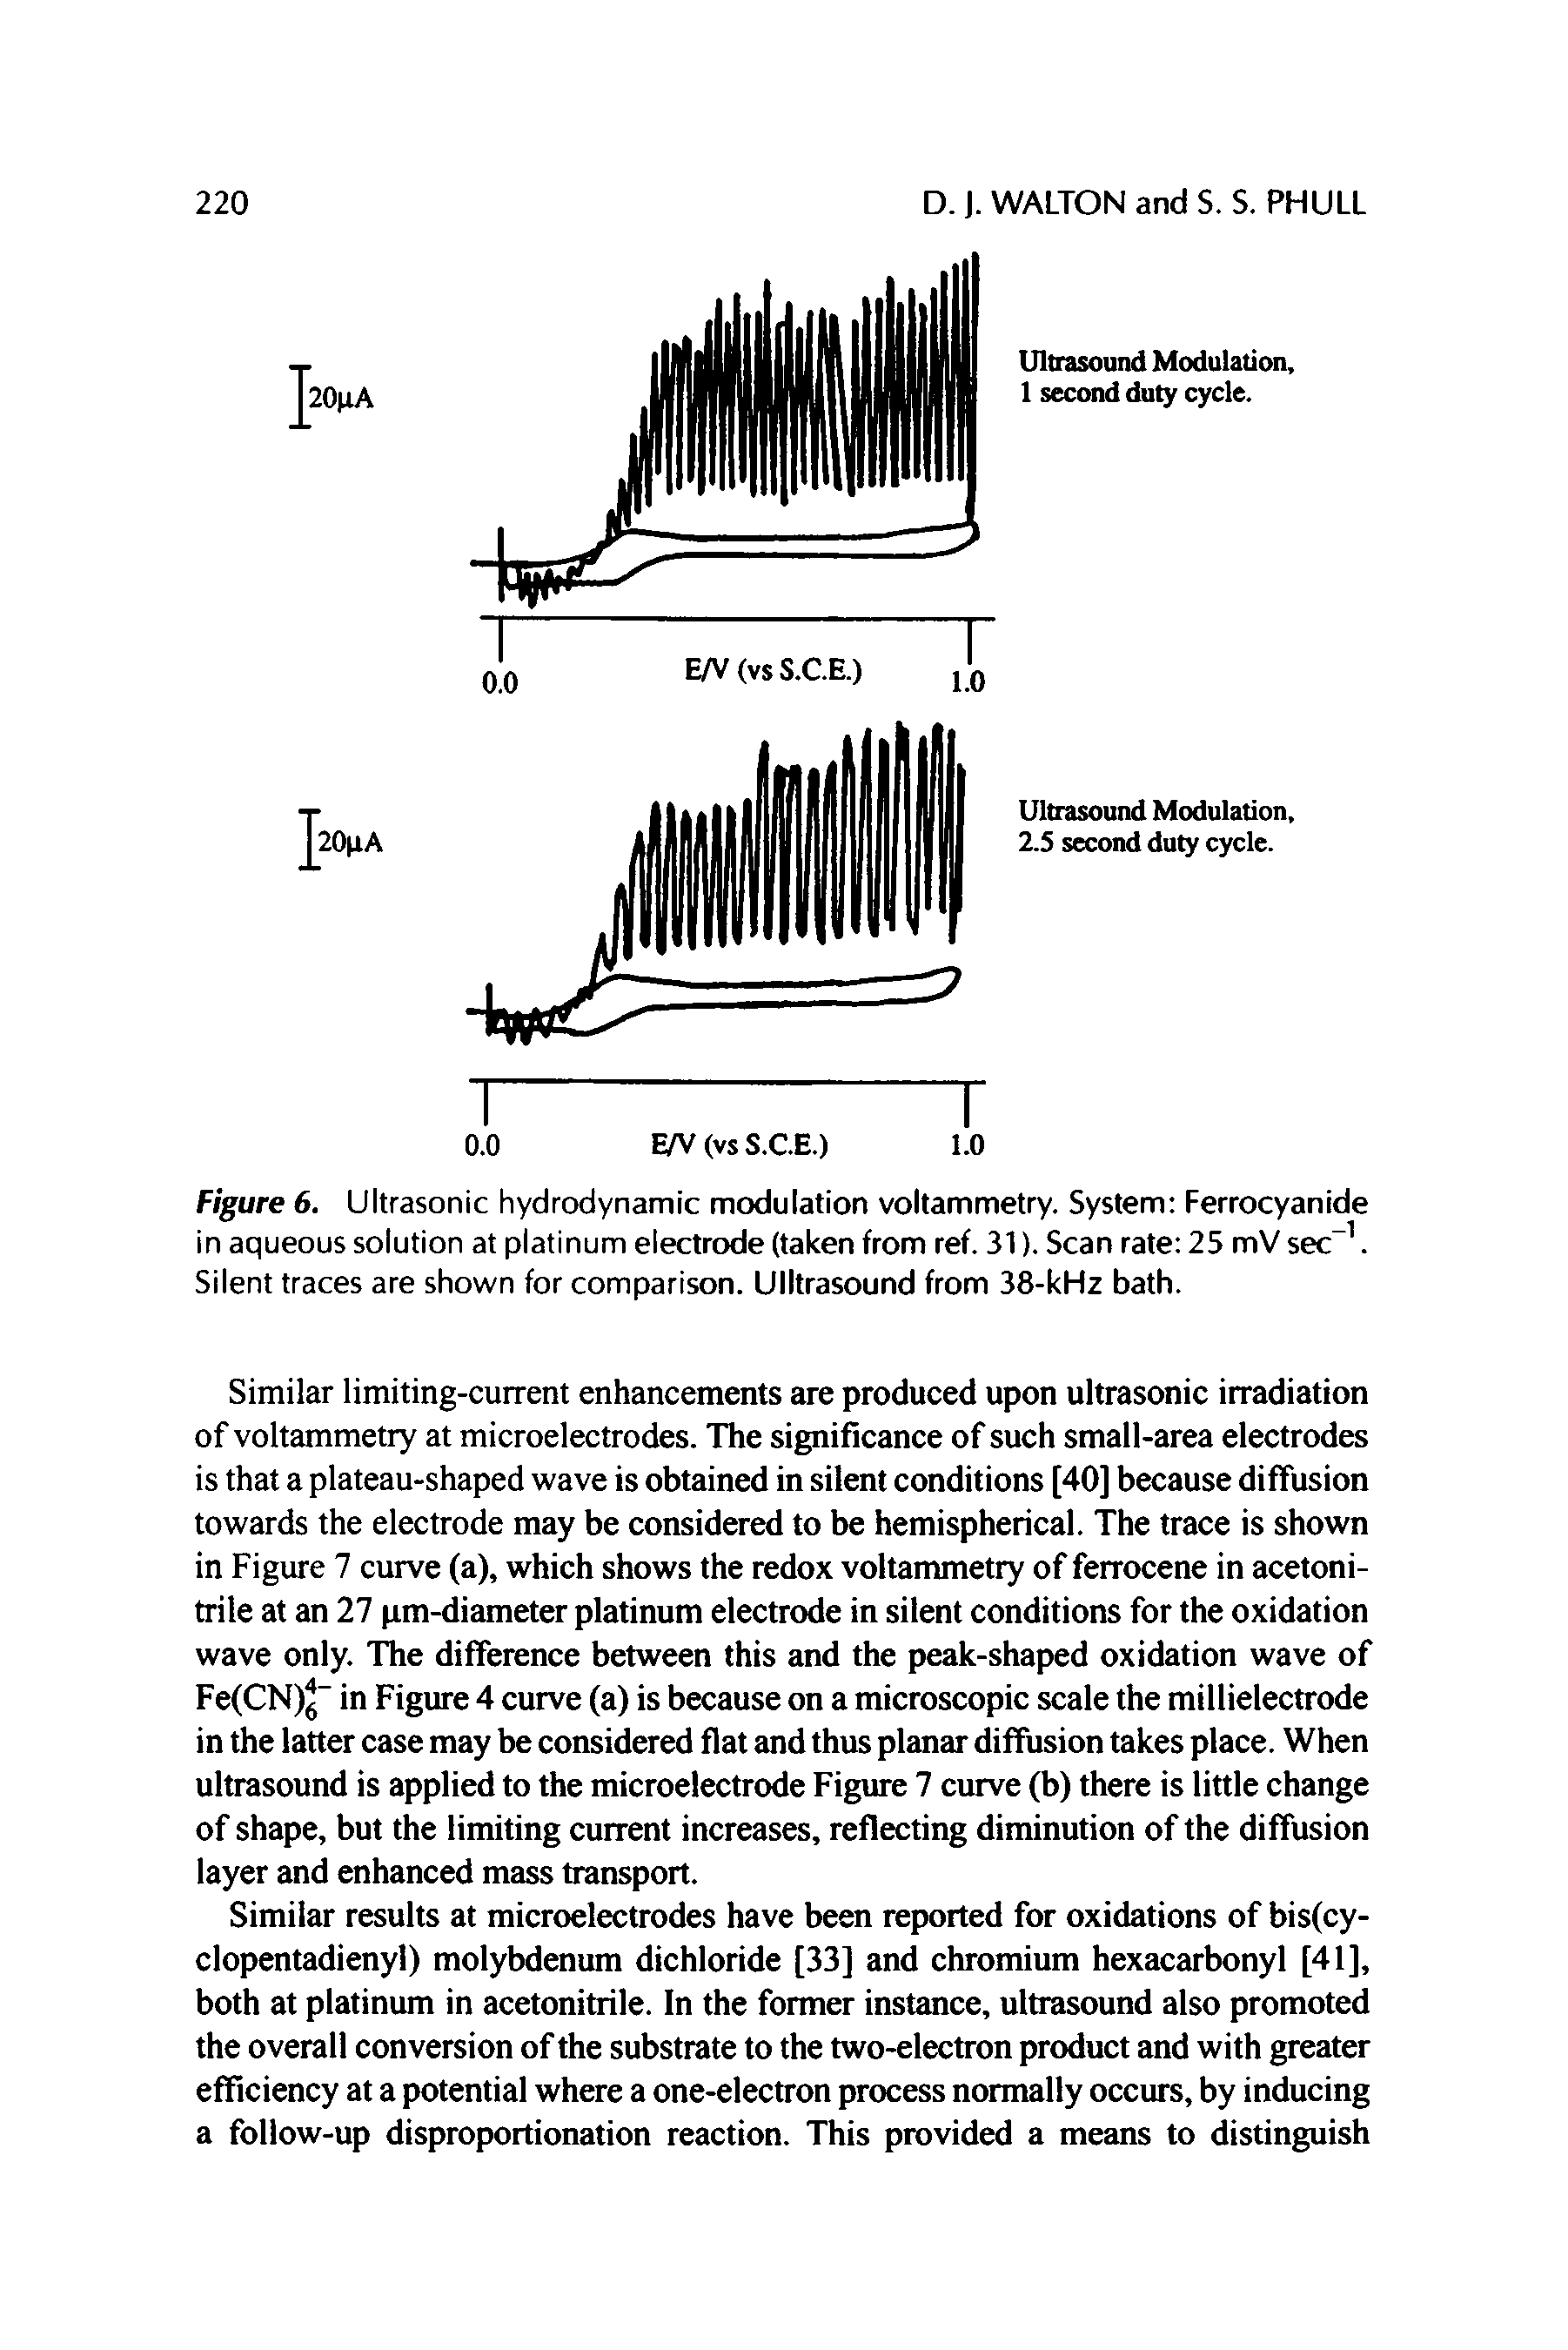 Figure 6. Ultrasonic hydrodynamic modulation voltammetry. System Ferrocyanide in aqueous solution at platinum electrode (taken from ref. 31). Scan rate 25 mV sec-1. Silent traces are shown for comparison. Ulltrasound from 38-kHz bath.